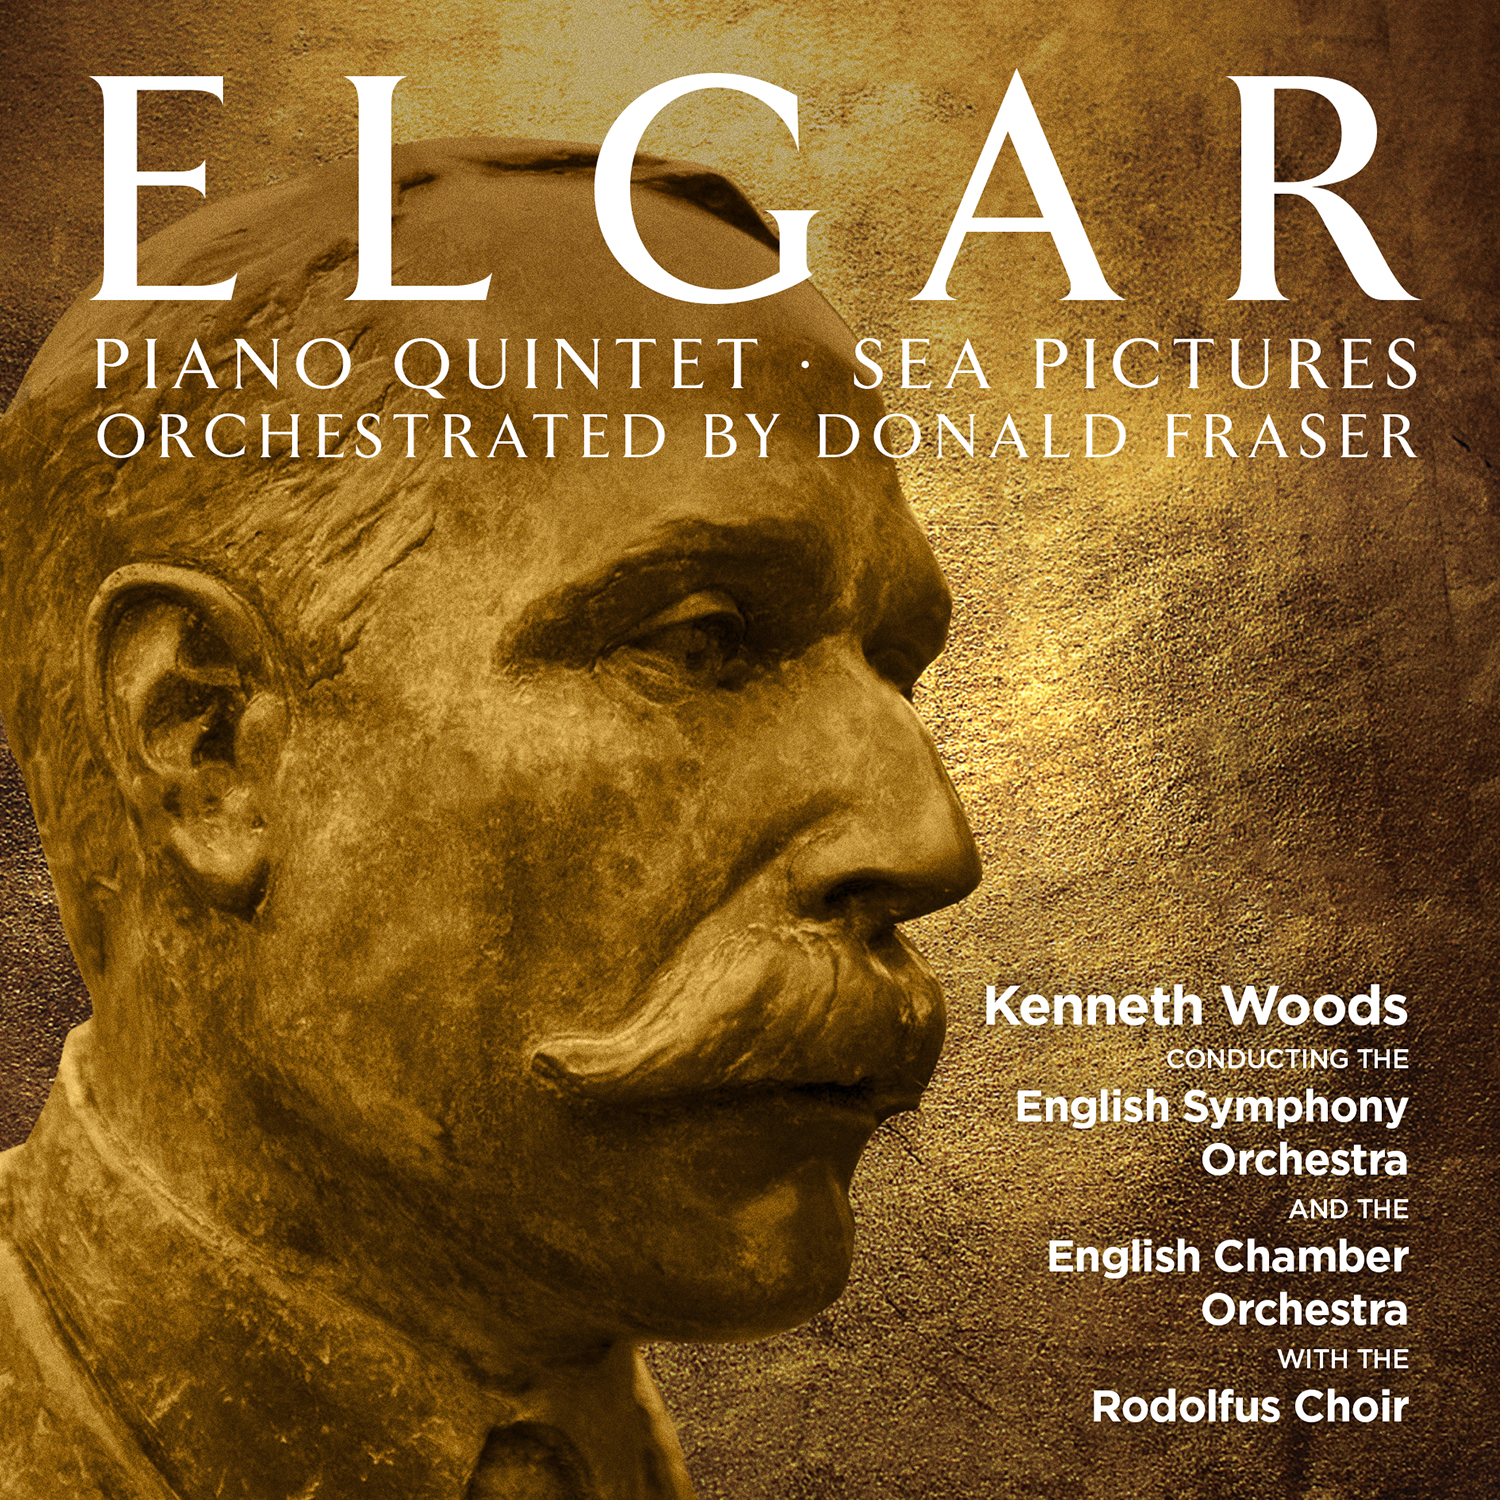 CD Review- Gramophone Magazine on Elgar arr. Fraser- Sea Pictures and Piano Quintet